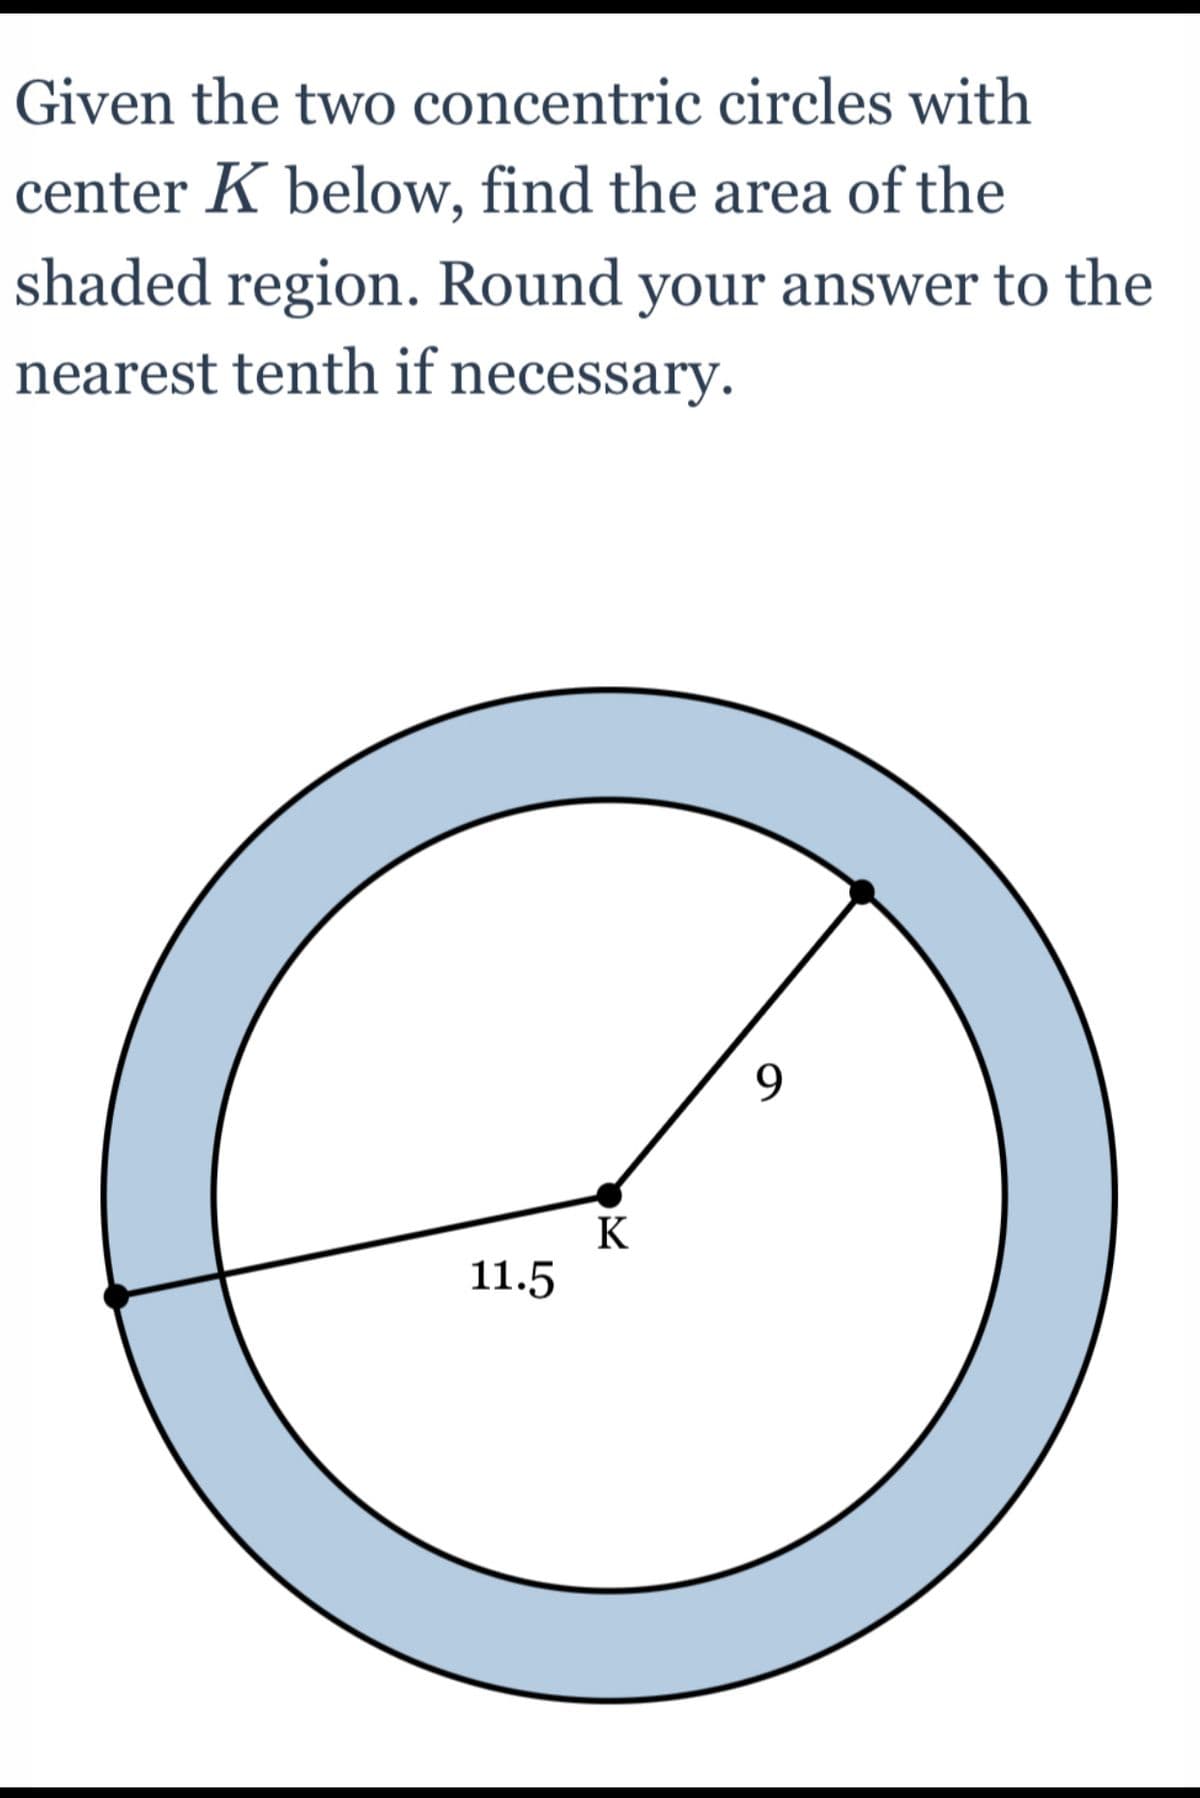 Given the two concentric circles with
center K below, find the area of the
shaded region. Round your answer to the
nearest tenth if necessary.
9
11.5
K